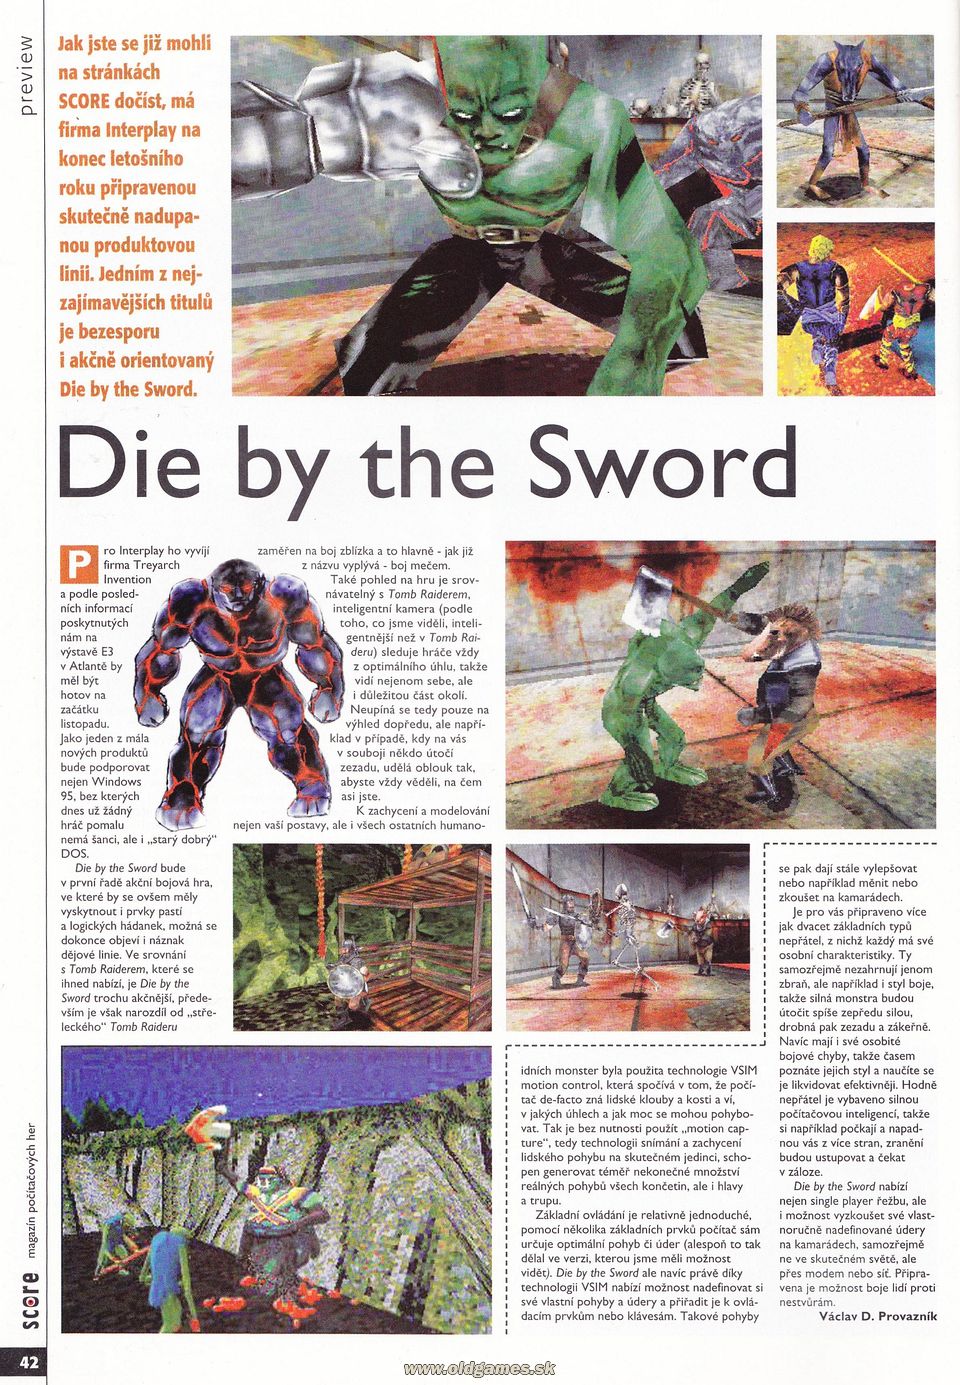 Preview: Die by the Sword